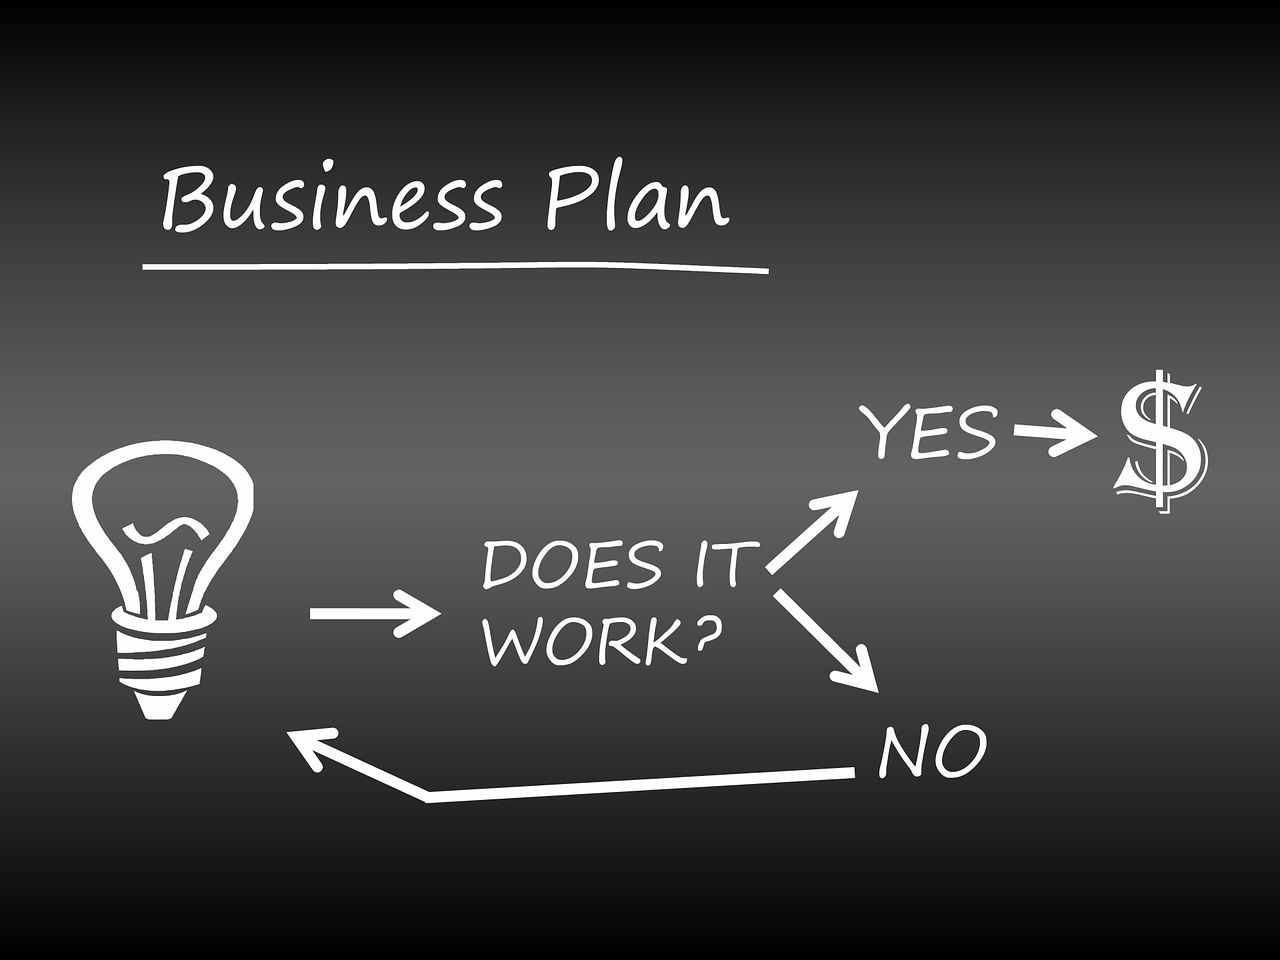 Your Business Needs a Plan